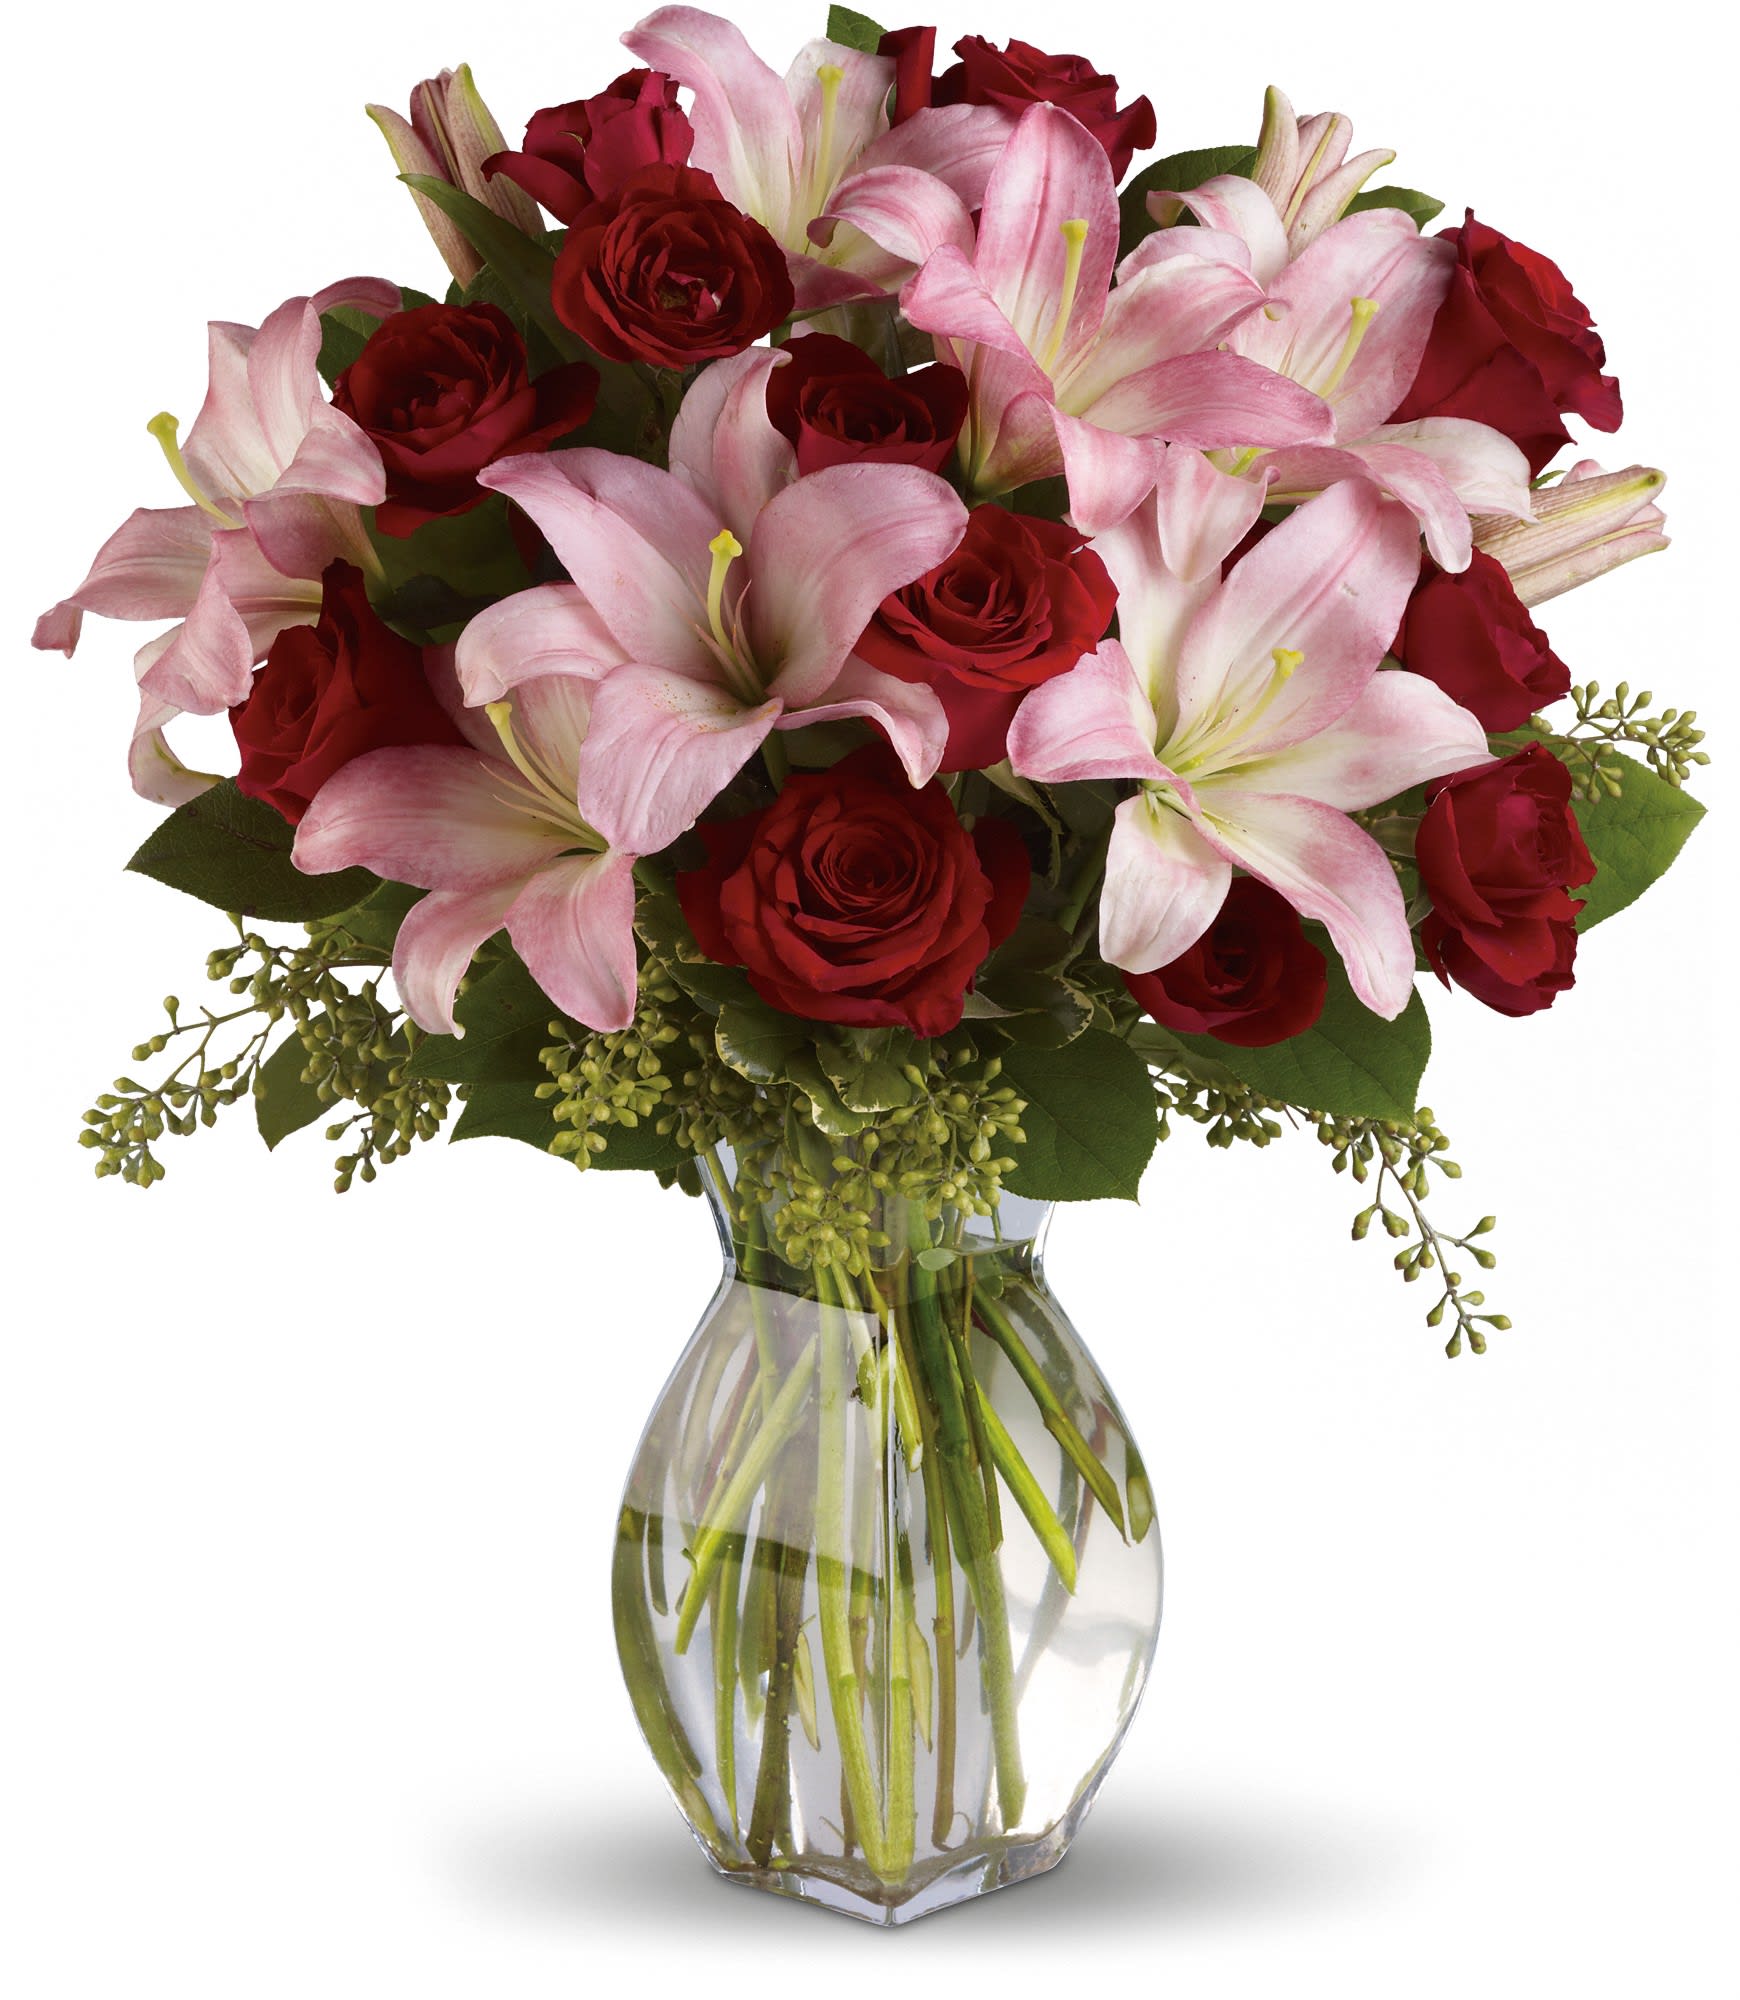 Lavish Love Bouquet with Long Stemmed Red Roses  -  T5-1A - Lovely reds and pinks come together in this lavishly romantic anniversary gift. Sweetly sentimental, this combination of colors and flowers is a delightfully fresh way to say &quot;I love you.&quot;  Radiant red roses and spray roses along with pretty in pink asiatic lilies are beautifully arranged in a stylish glass vase. It's a beautiful way to celebrate a romance that deepens with each passing year.  Approximately 17&quot; W x 20&quot; H  Orientation: One-Sided      As Shown : T5-1A     Deluxe : T5-1B     Premium : T5-1C  